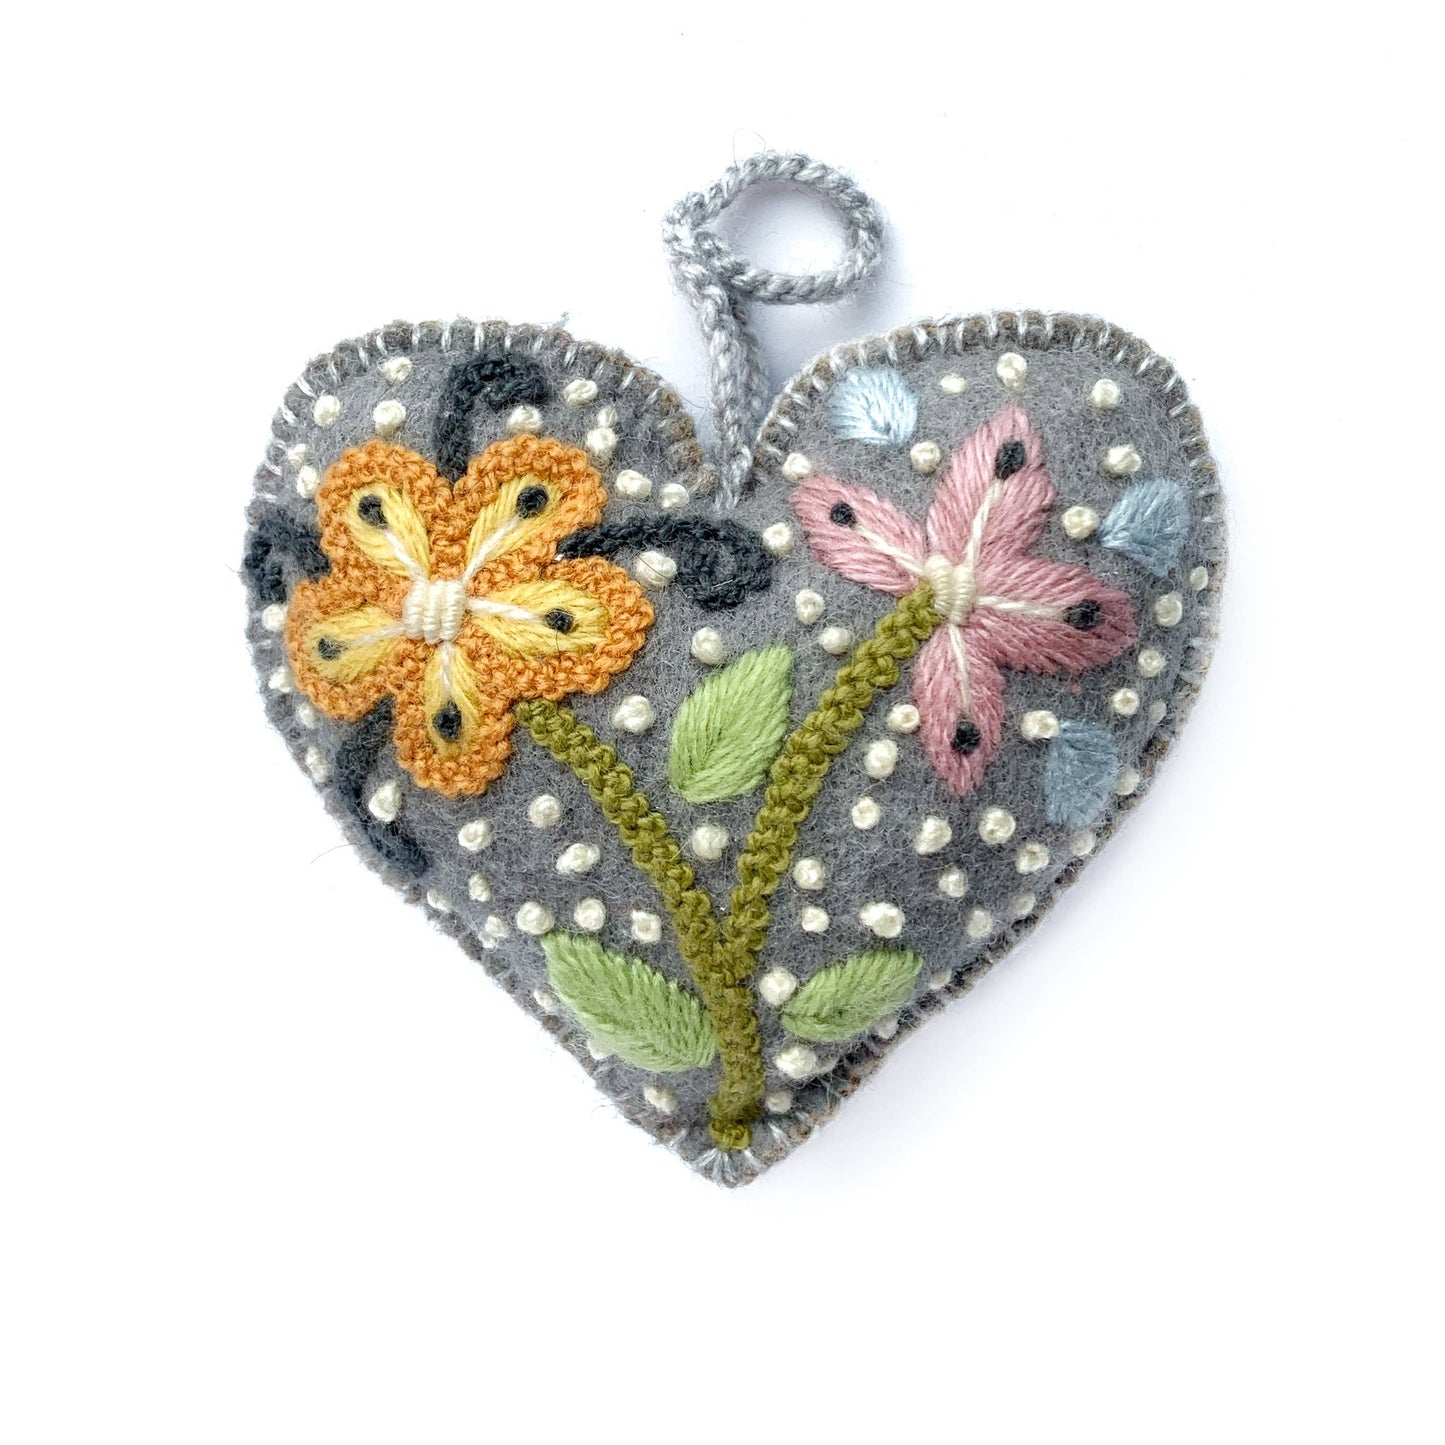 Colorful Embroidered Heart Ornament from Ornaments 4 Orphans